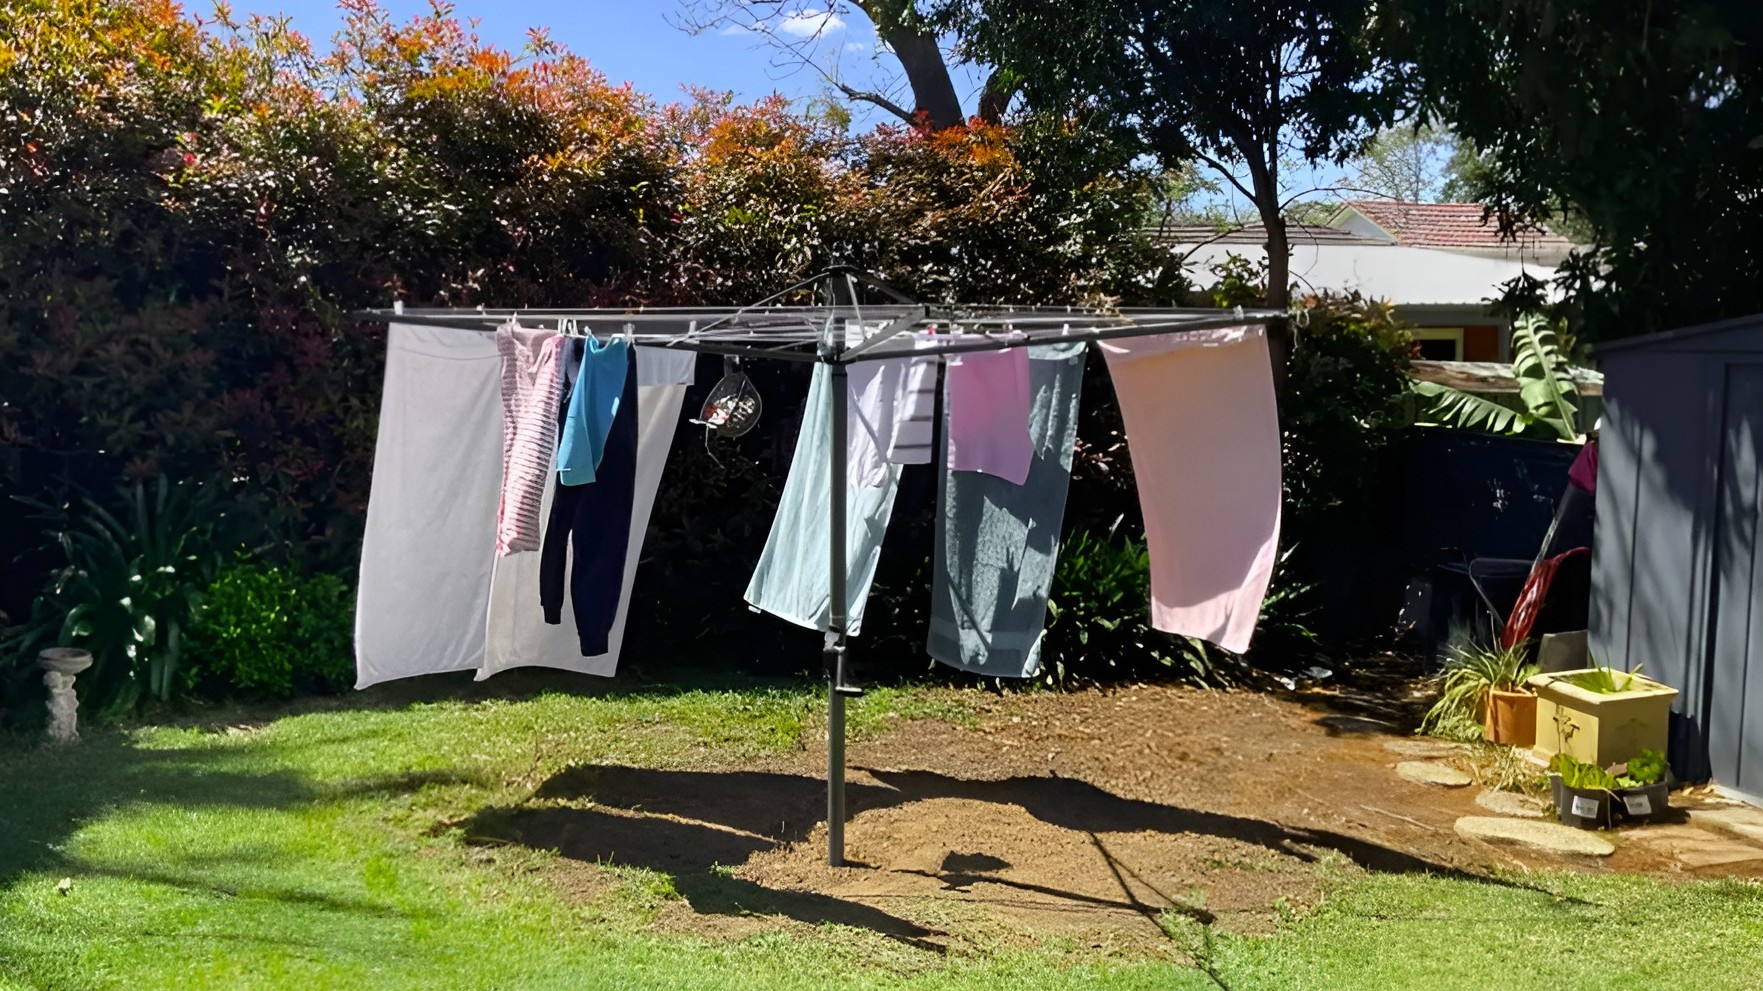 Comprehensive Austral Foldaway 45 Clothesline Review: The Space-Saving Solution?